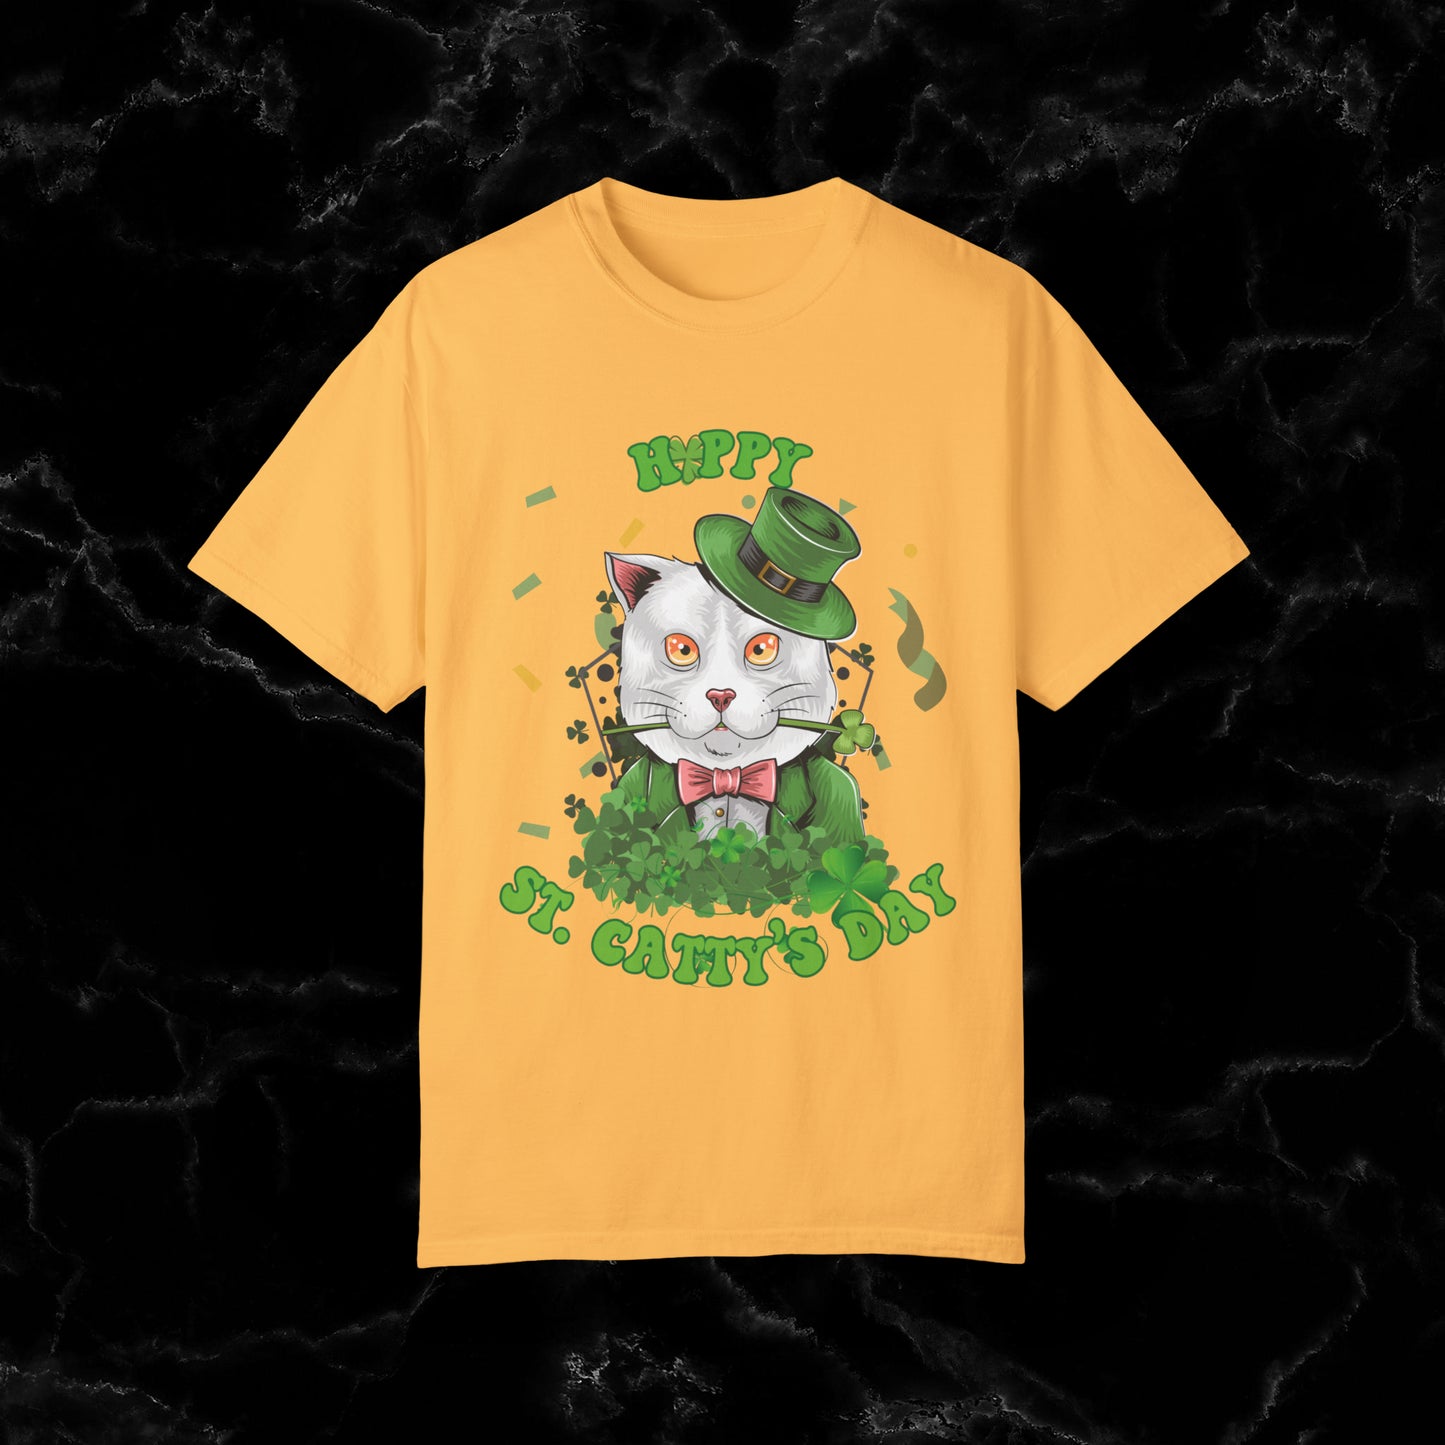 Happy St. Catty's Day Funny St. Patrick's Day Comfort Colors T-Shirt - St. Paddy's Day Shirt for Cat Lover St. Patty's Day Fun T-Shirt Citrus S 